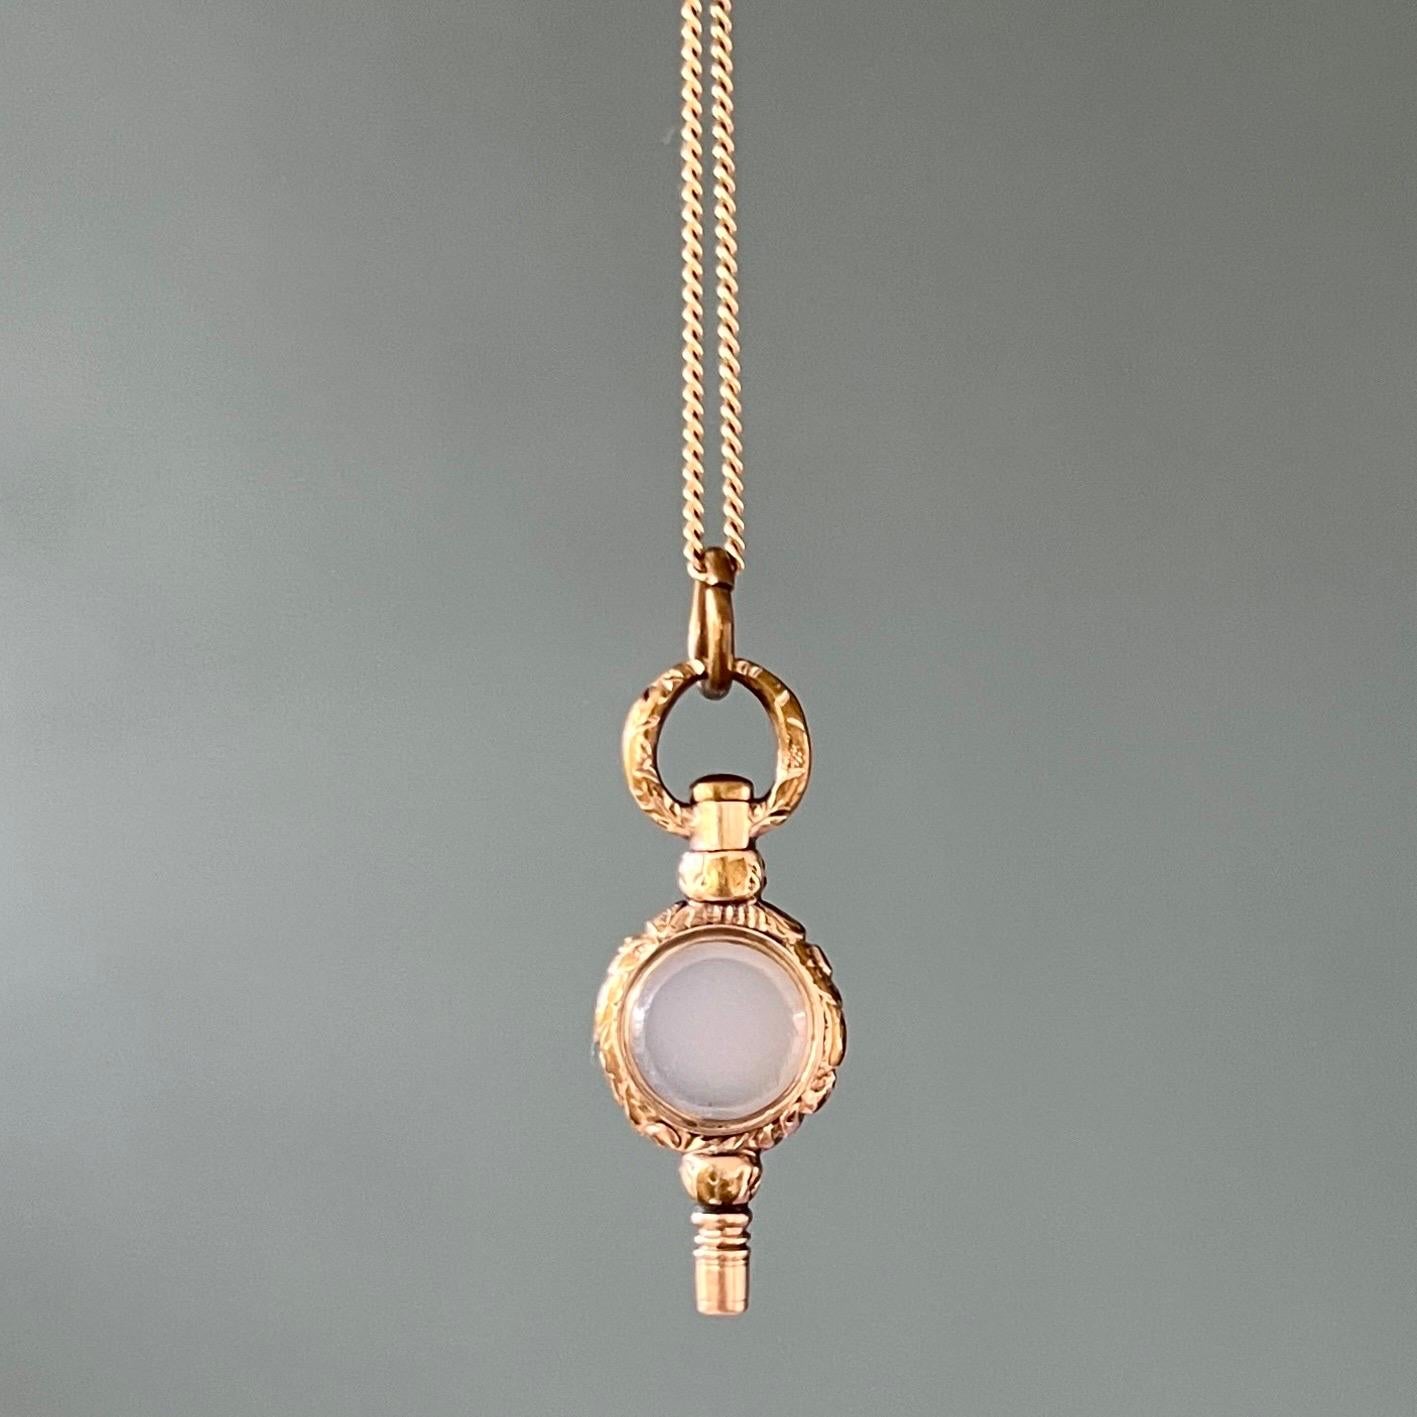 An antique Georgian 9 karat yellow gold pocket watch key charm pendant. This antique watch key has some great details. The key has a carved shank on top and the frame has a scrolling and chased design with a milky bluish colored agate stone in the